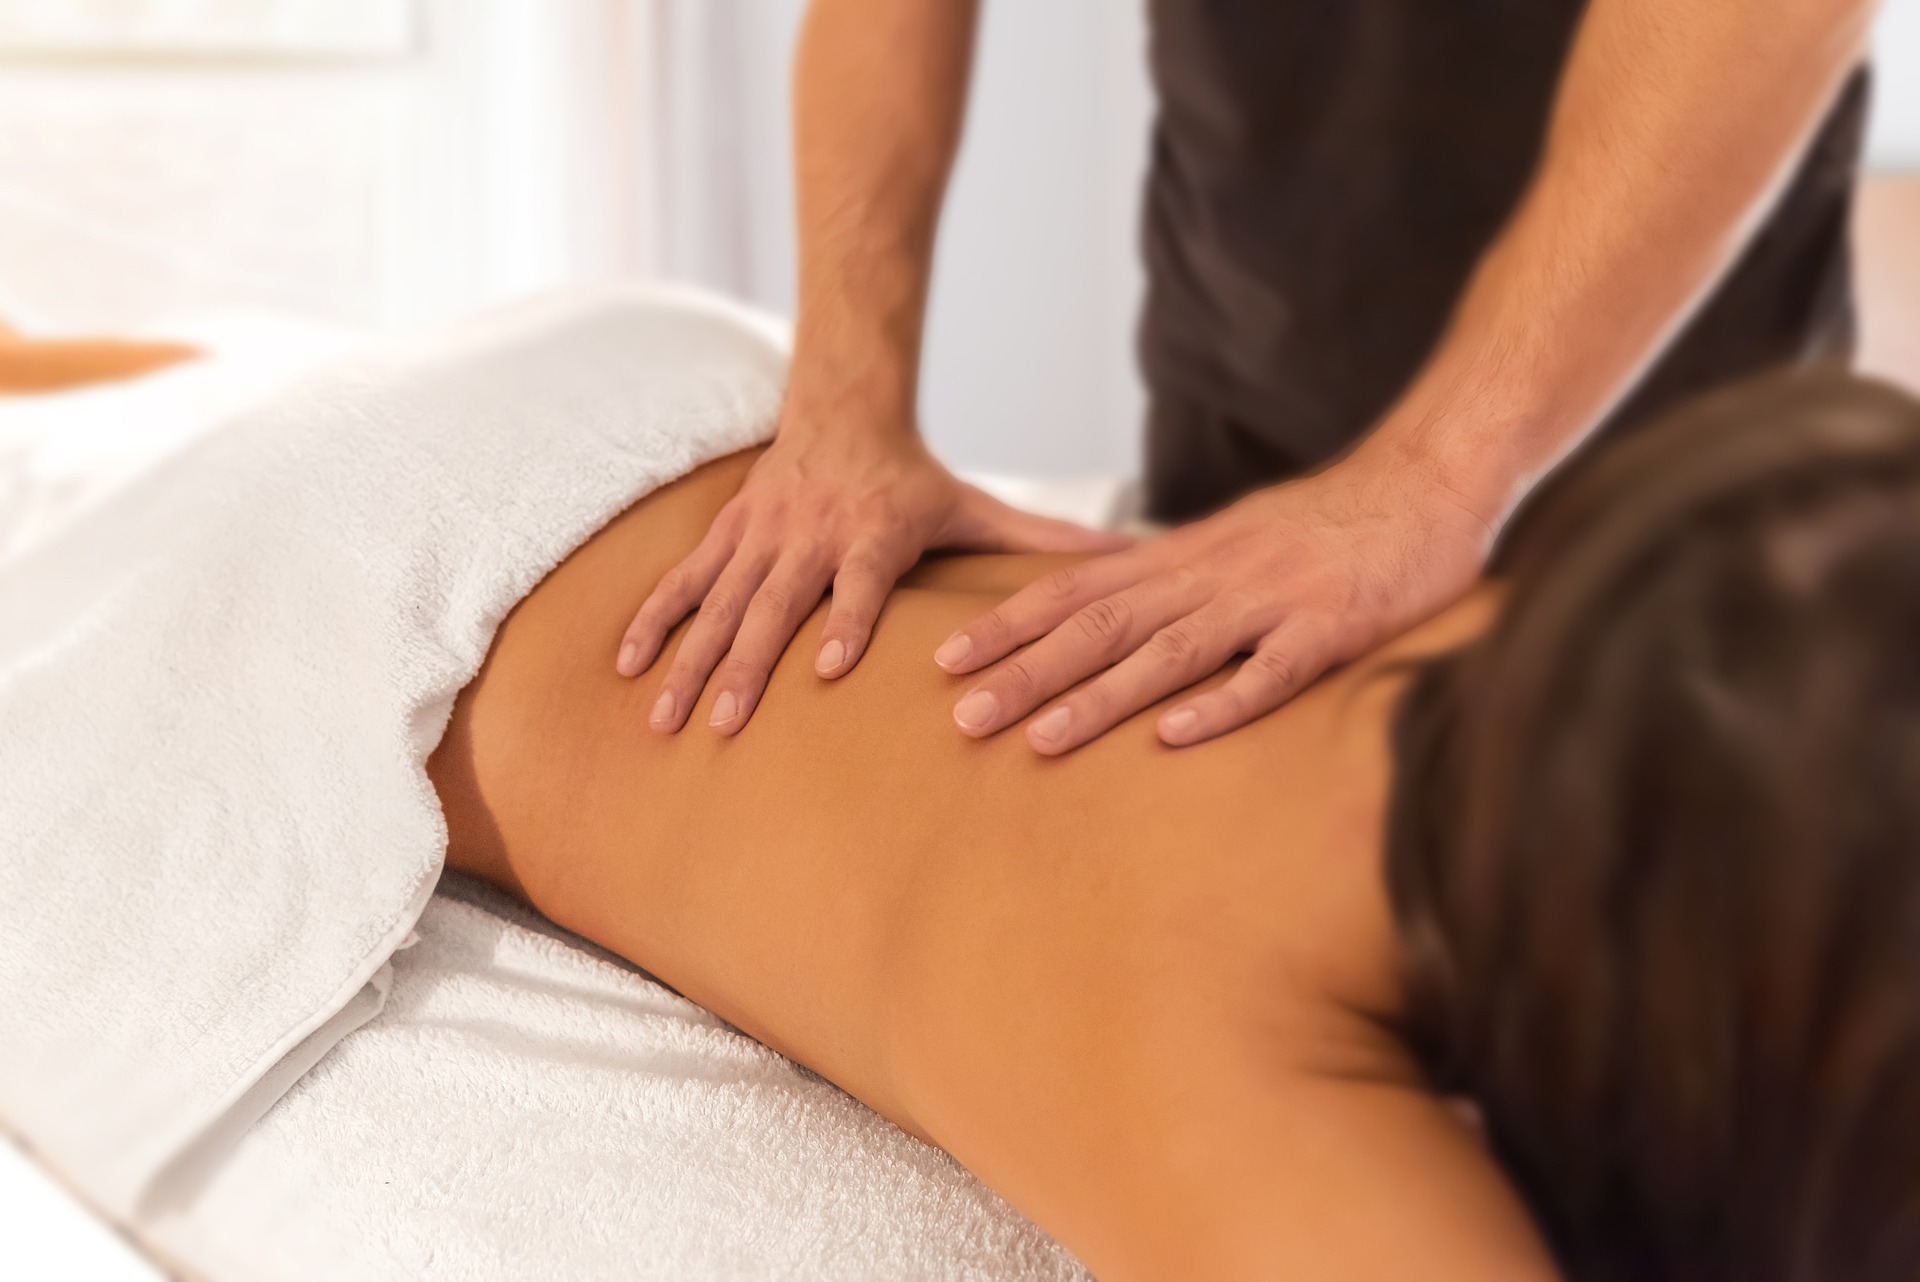 https://www.sapnamed.com/wp-content/uploads/2020/08/massage-therapy-for-treating-low-back-pain.jpg